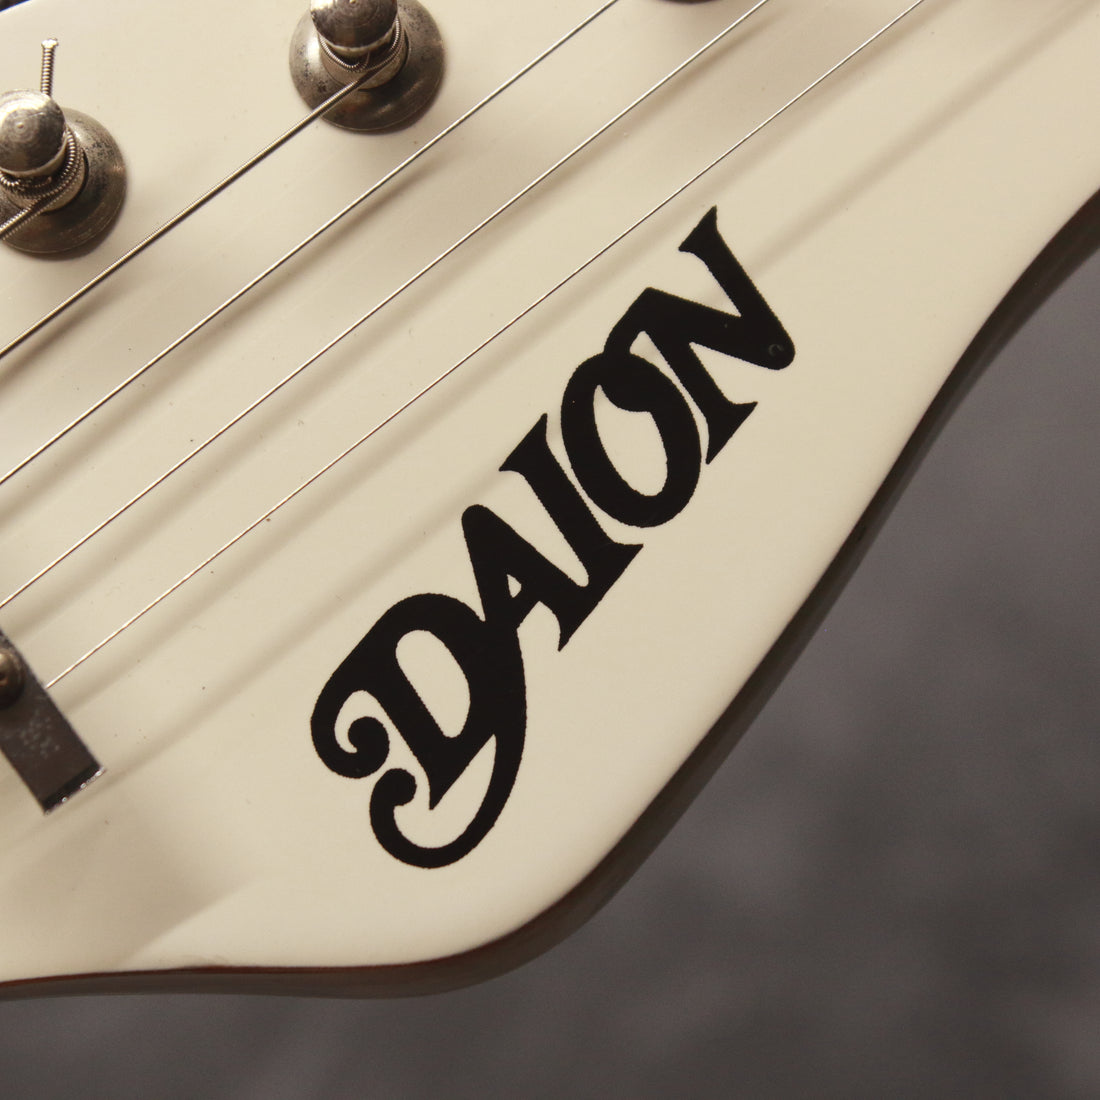 Daion Superstrat-Style White 1988